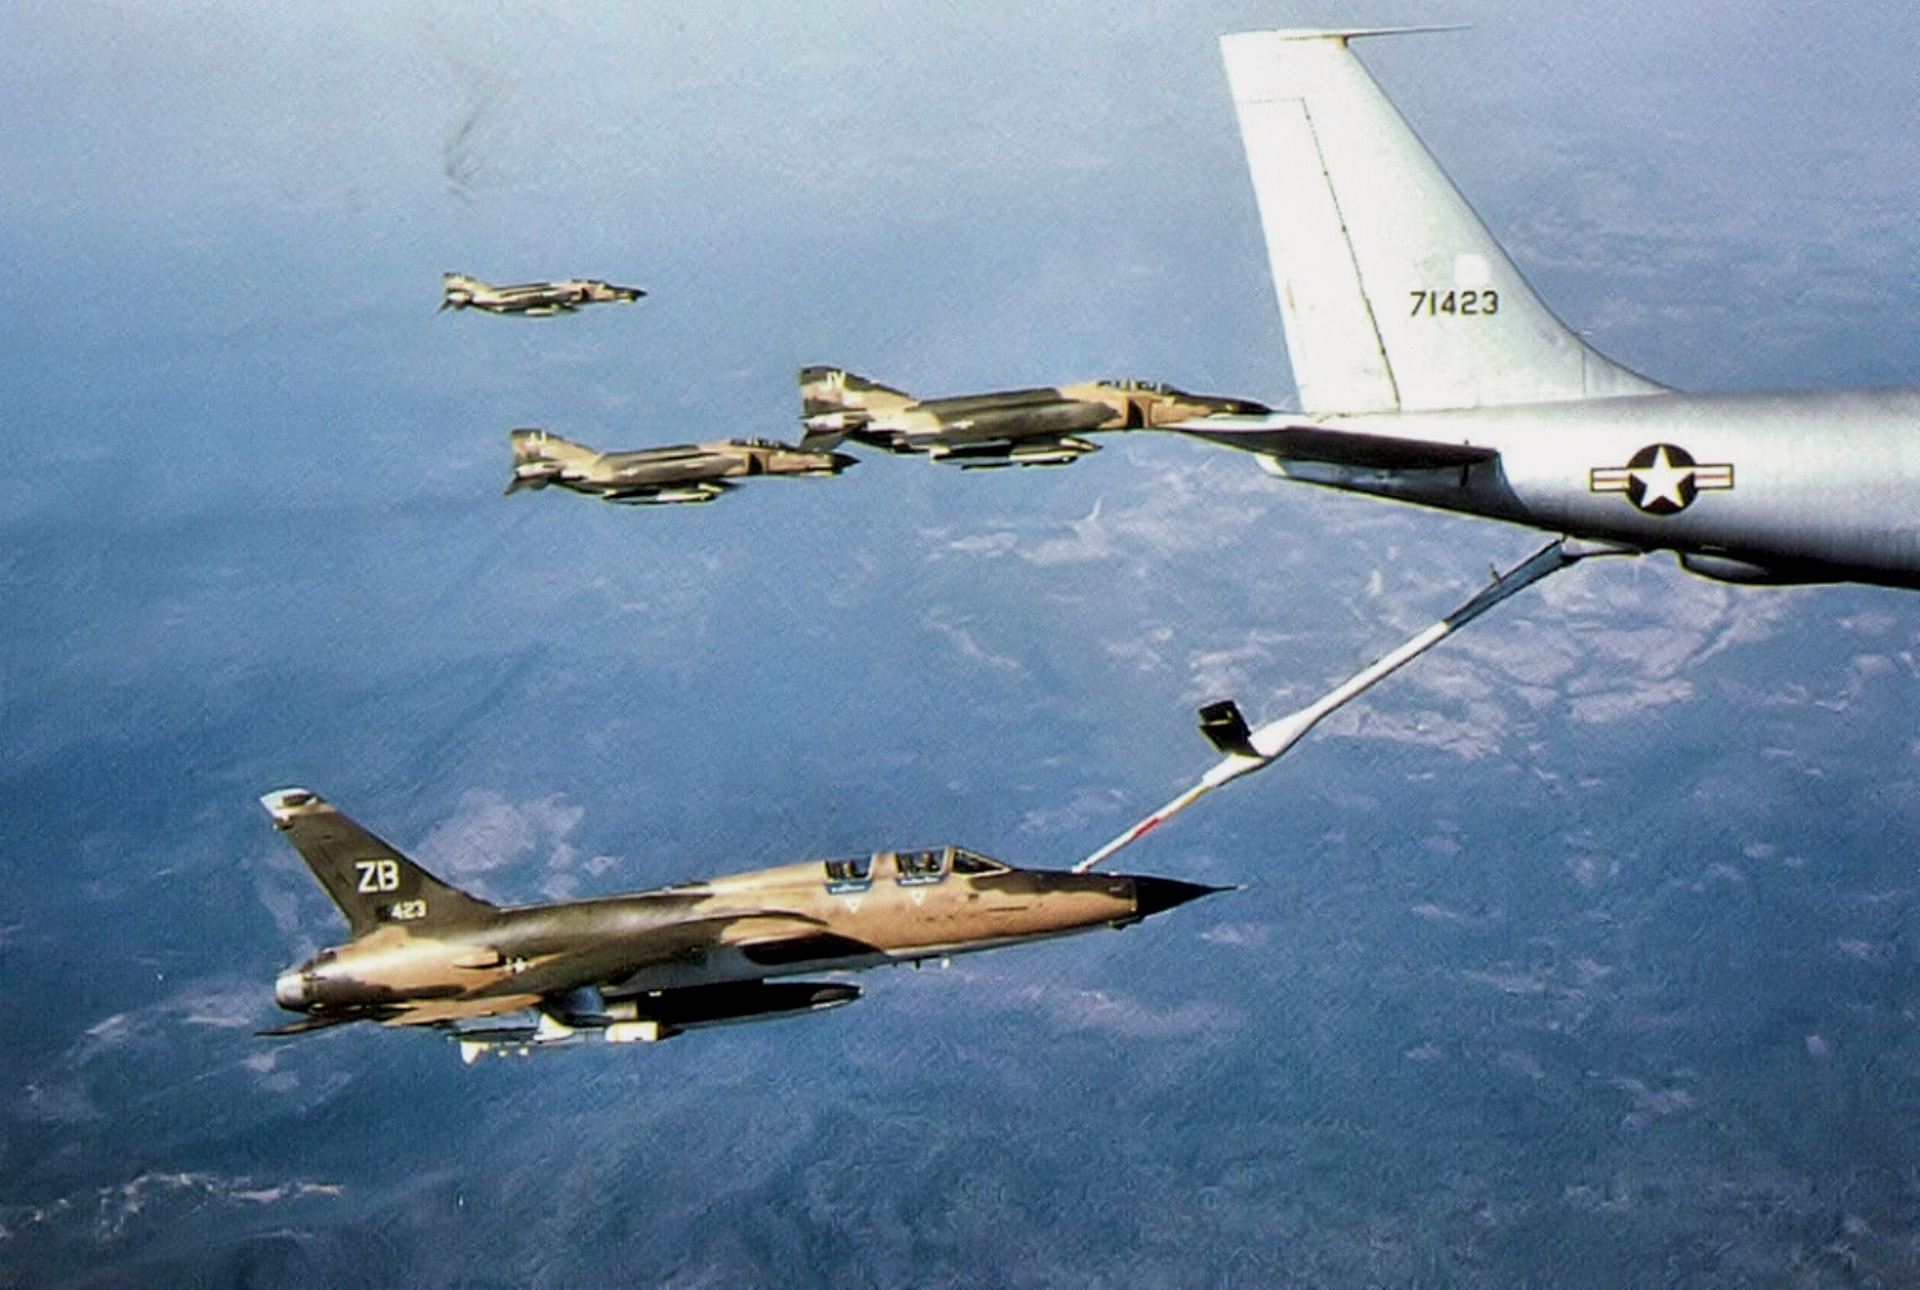 An Air Force KC-135 Stratotanker refuels a flight of F-105 Thunderchiefs on their way to strike targets in North Vietnam. Refueling operations in the Vietnam War peaked during Operation Rolling Thunder.